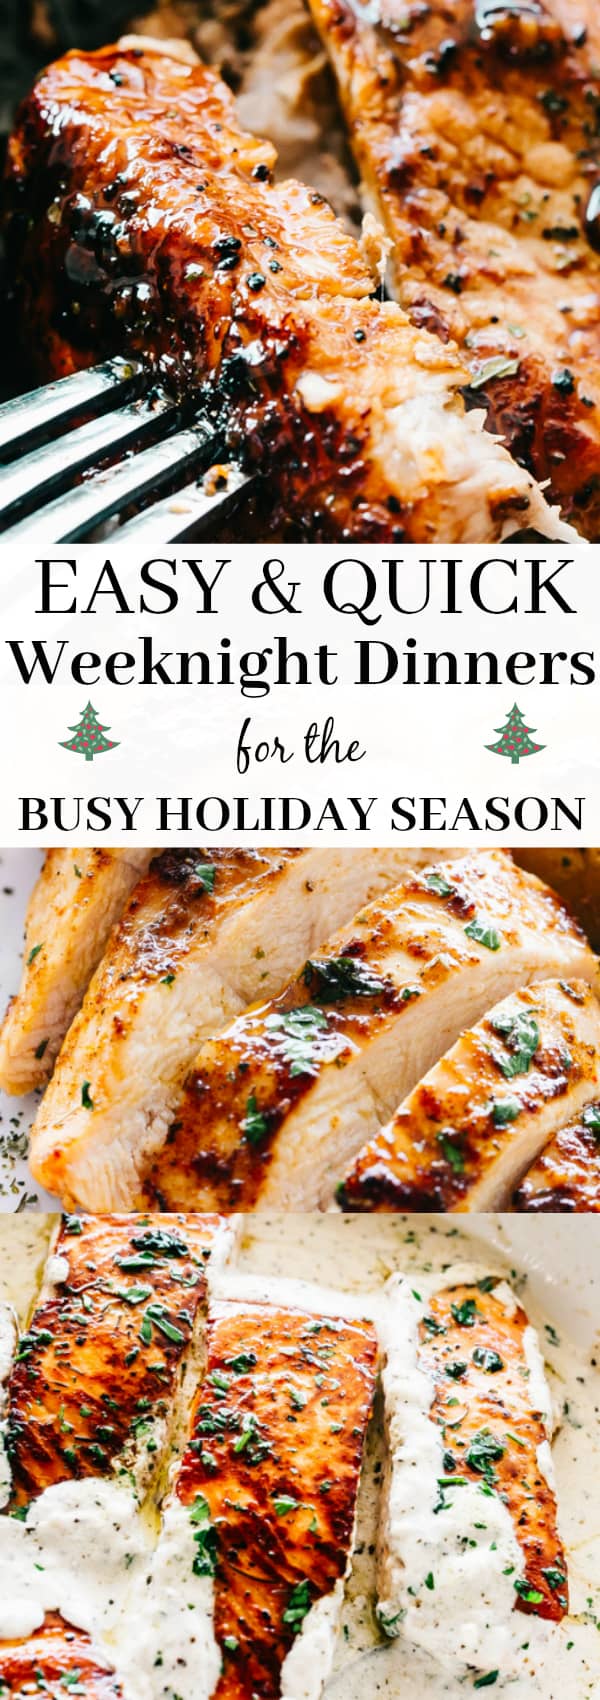 Easy and Quick Weeknight Dinners for the Busy Holiday Season